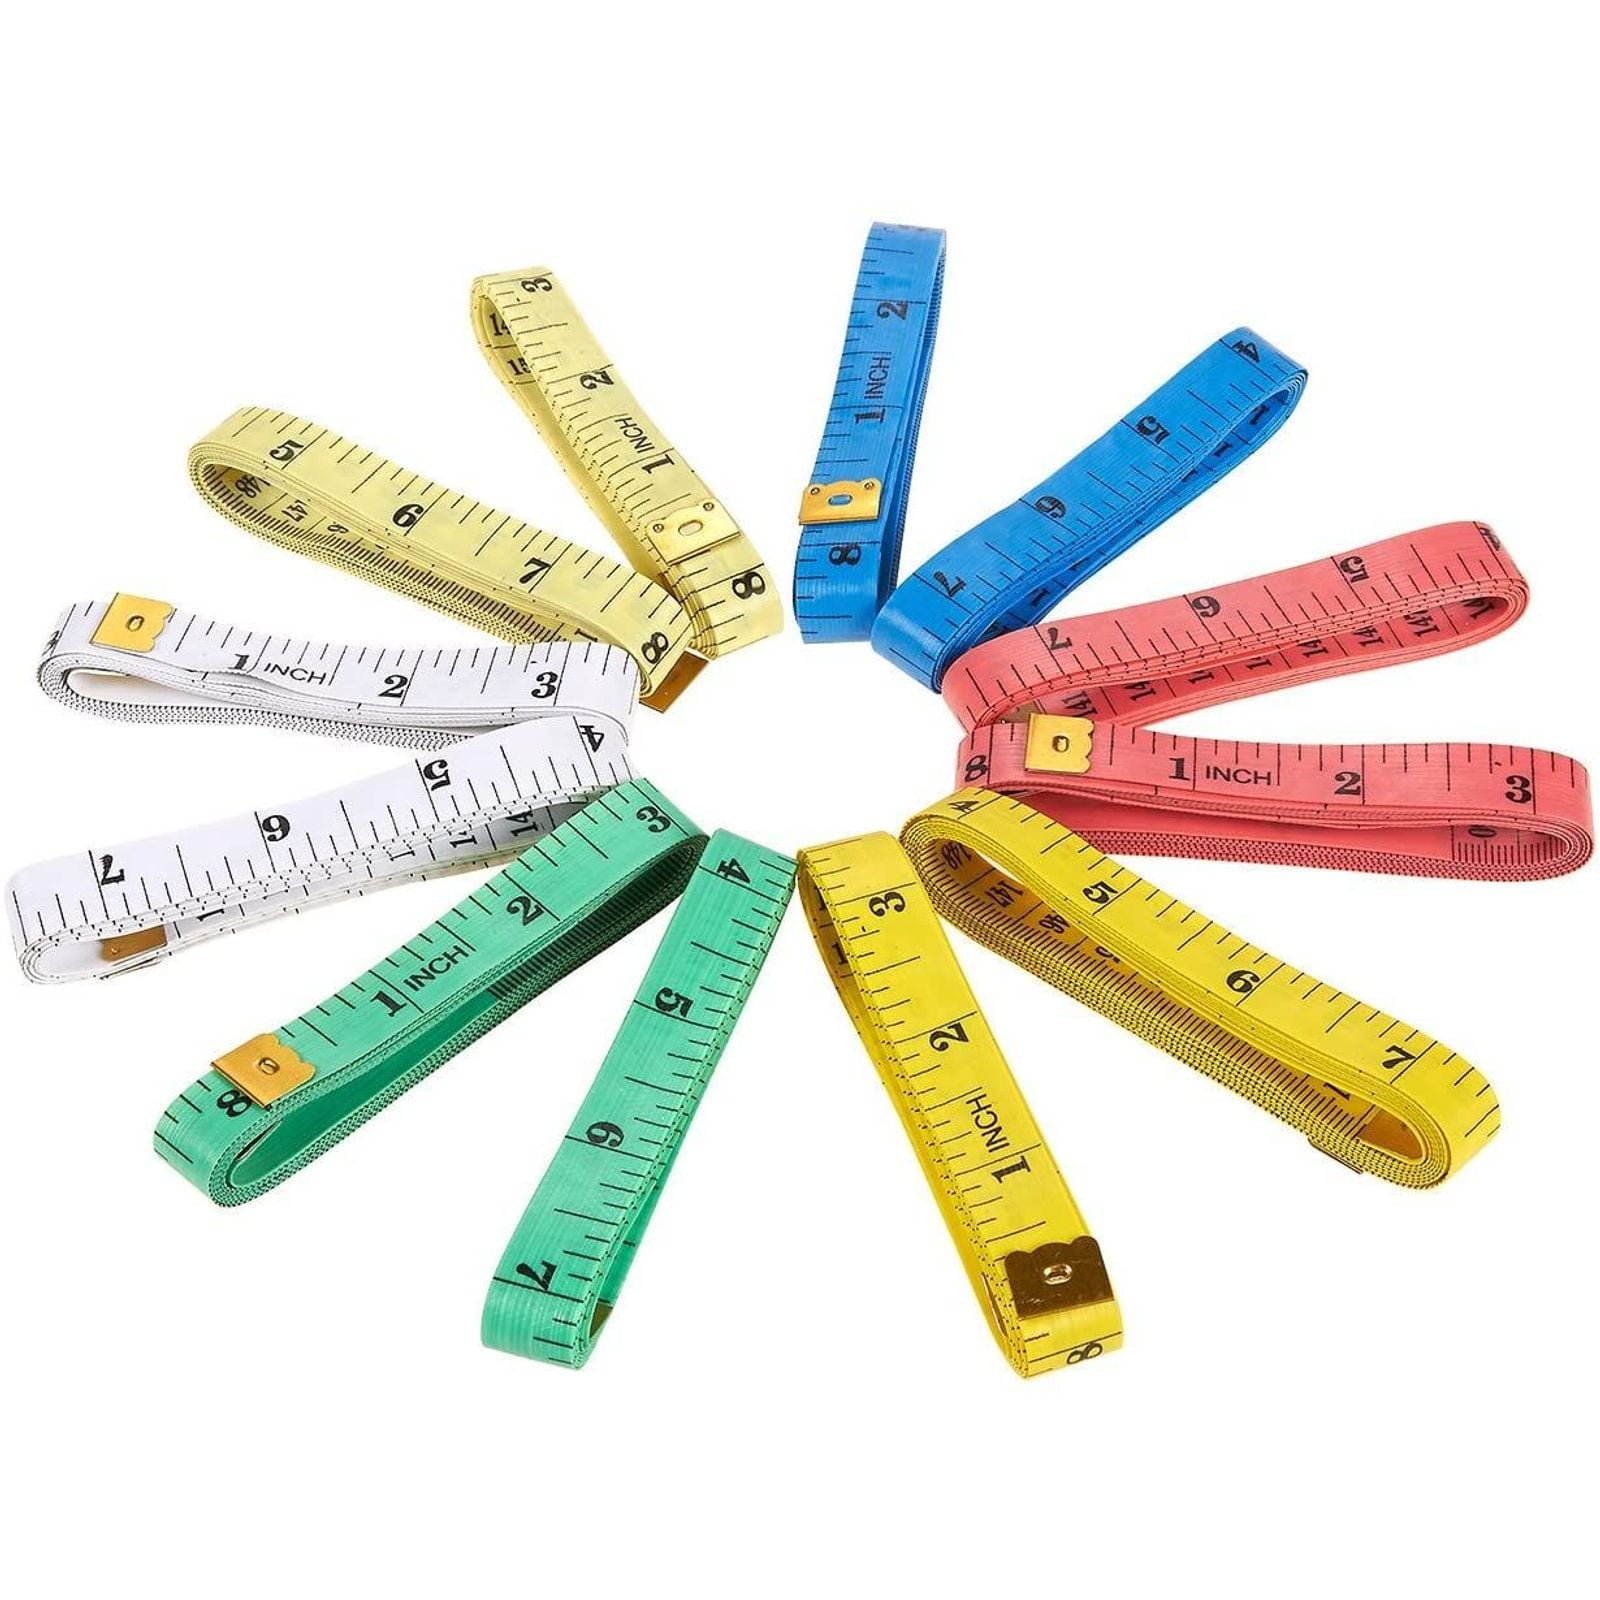 4 Different Colors 60 inches / 150 cm Random Color 12PCS Soft Tape Measure Used for Sewing Cloth Ruler and Body Measuring Tape